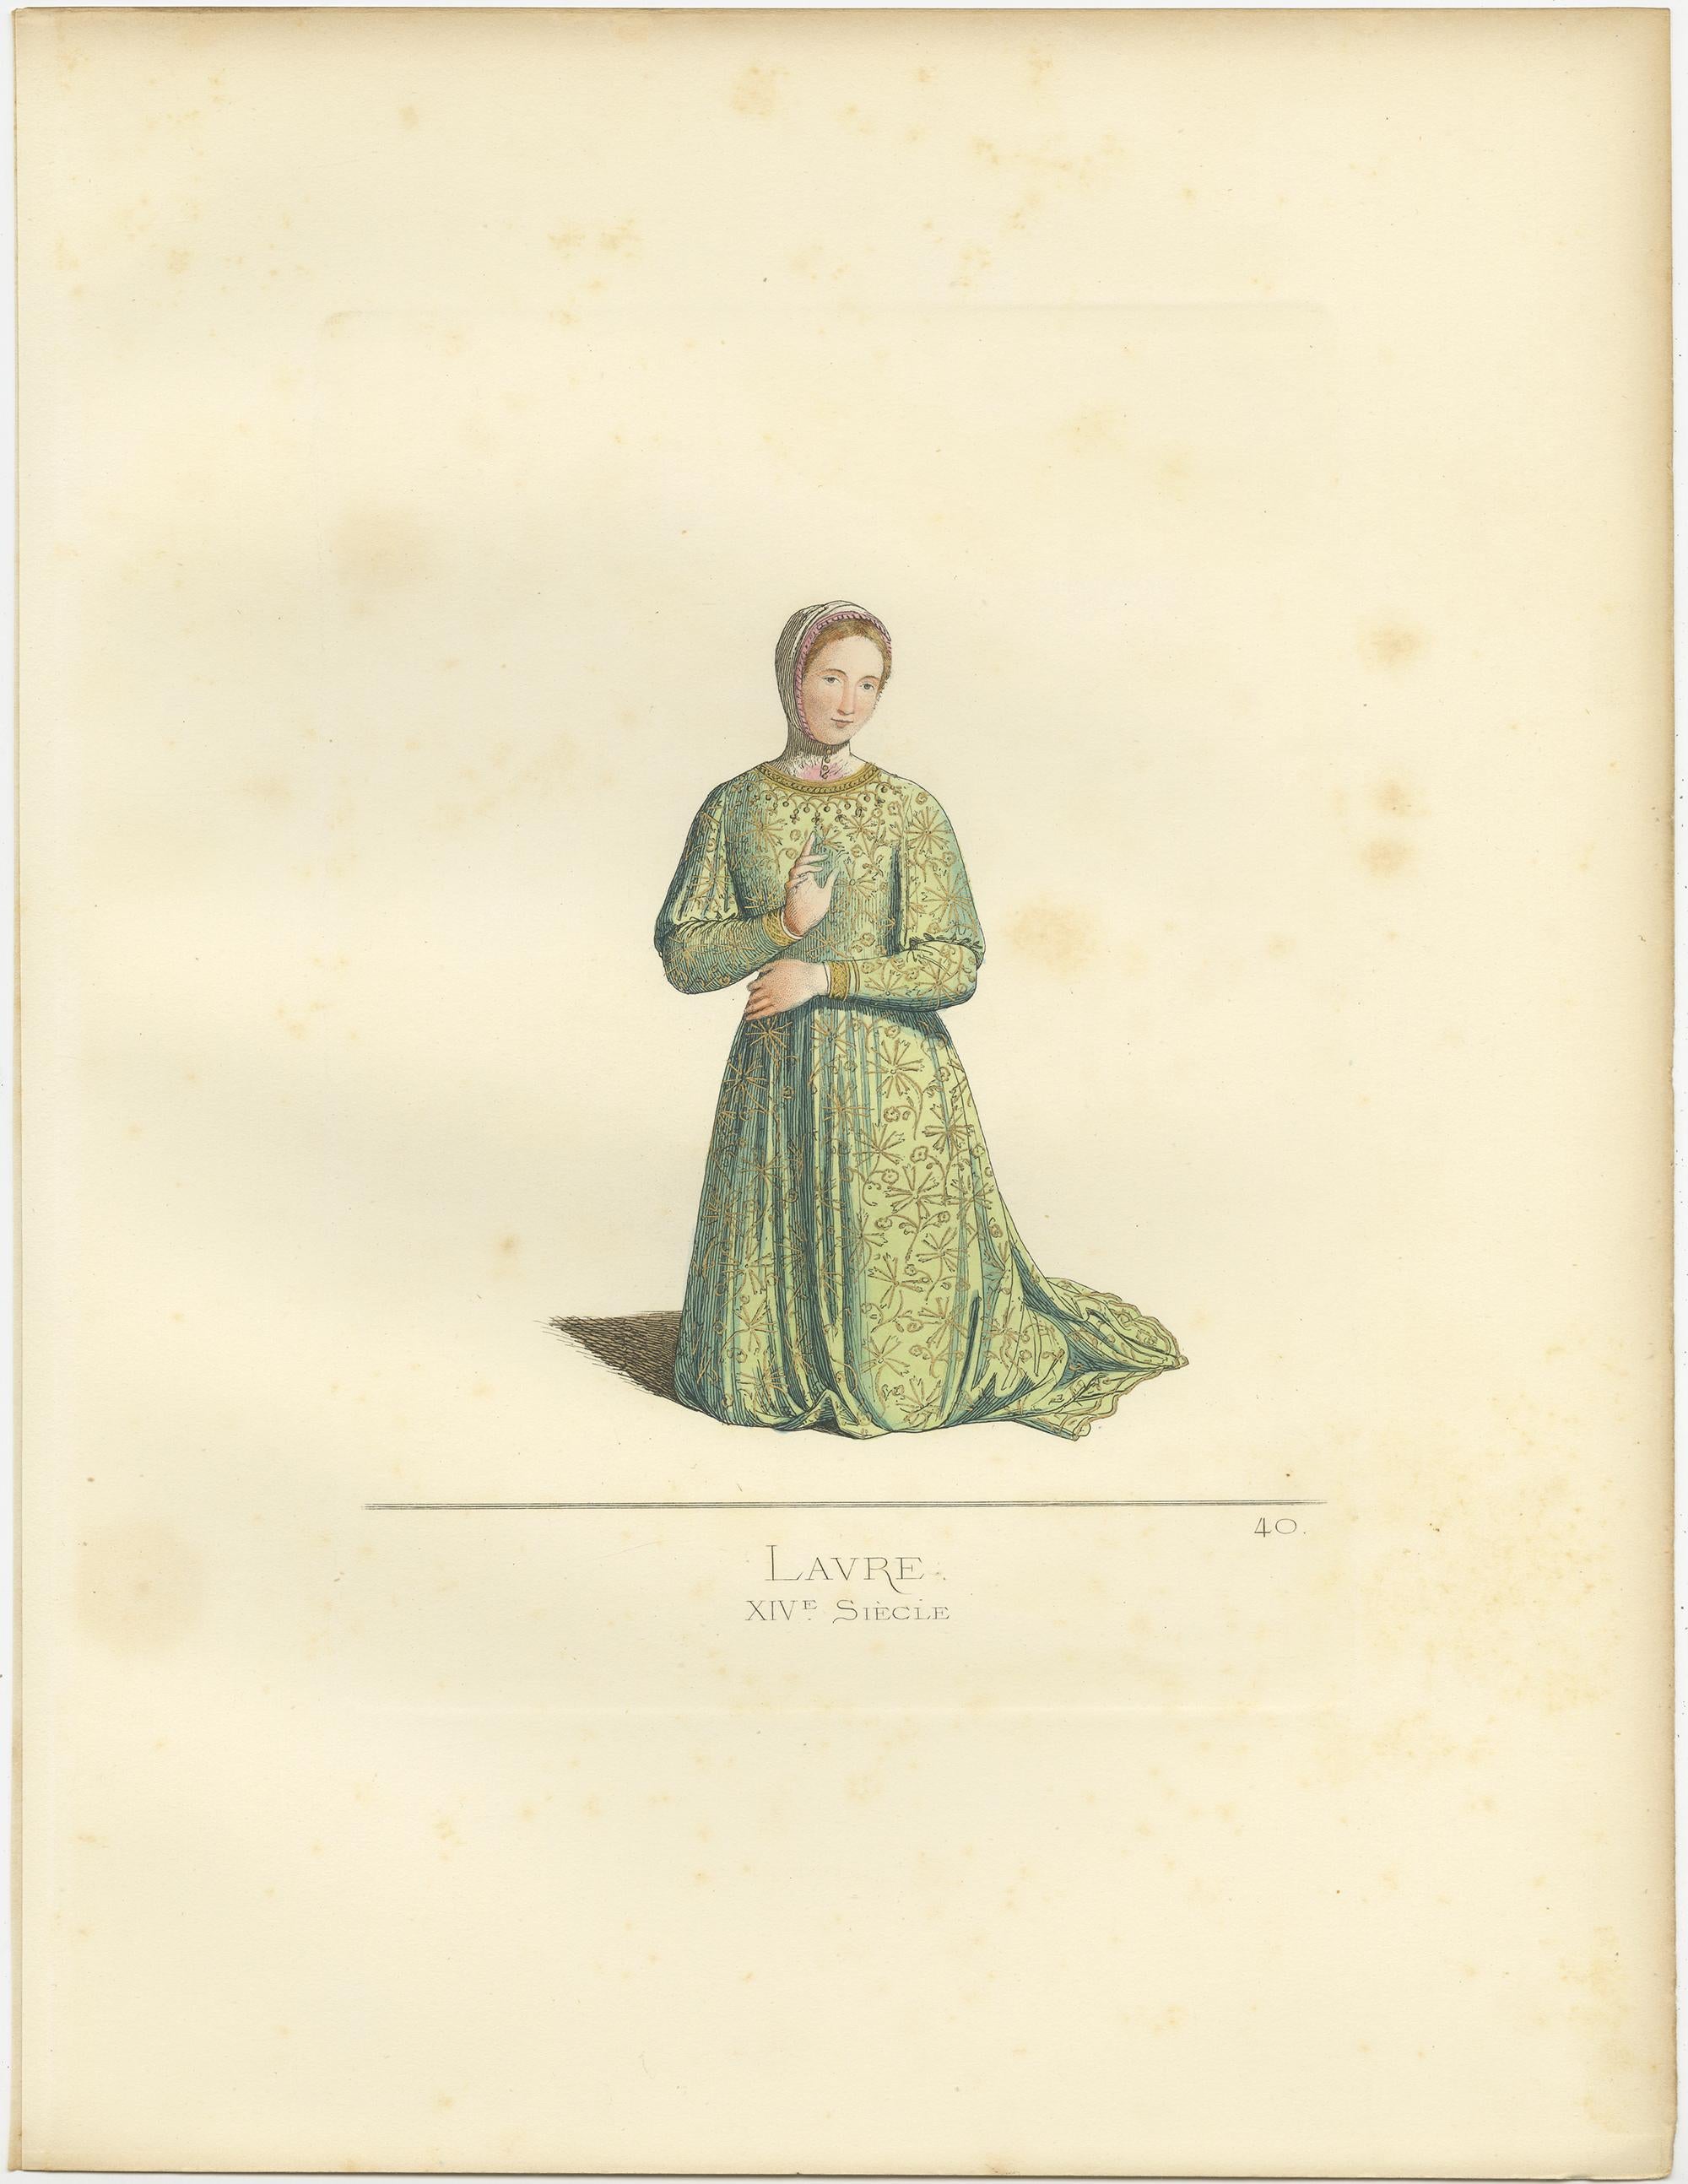 Antique print titled ‘Laure, XIVe Siecle.’ Original antique print of Laura, 14th century. Laura is the protagonist in one of Petrarch’s (1304–1374) poems. This print originates from 'Costumes historiques de femmes du XIII, XIV et XV siècle' by C.